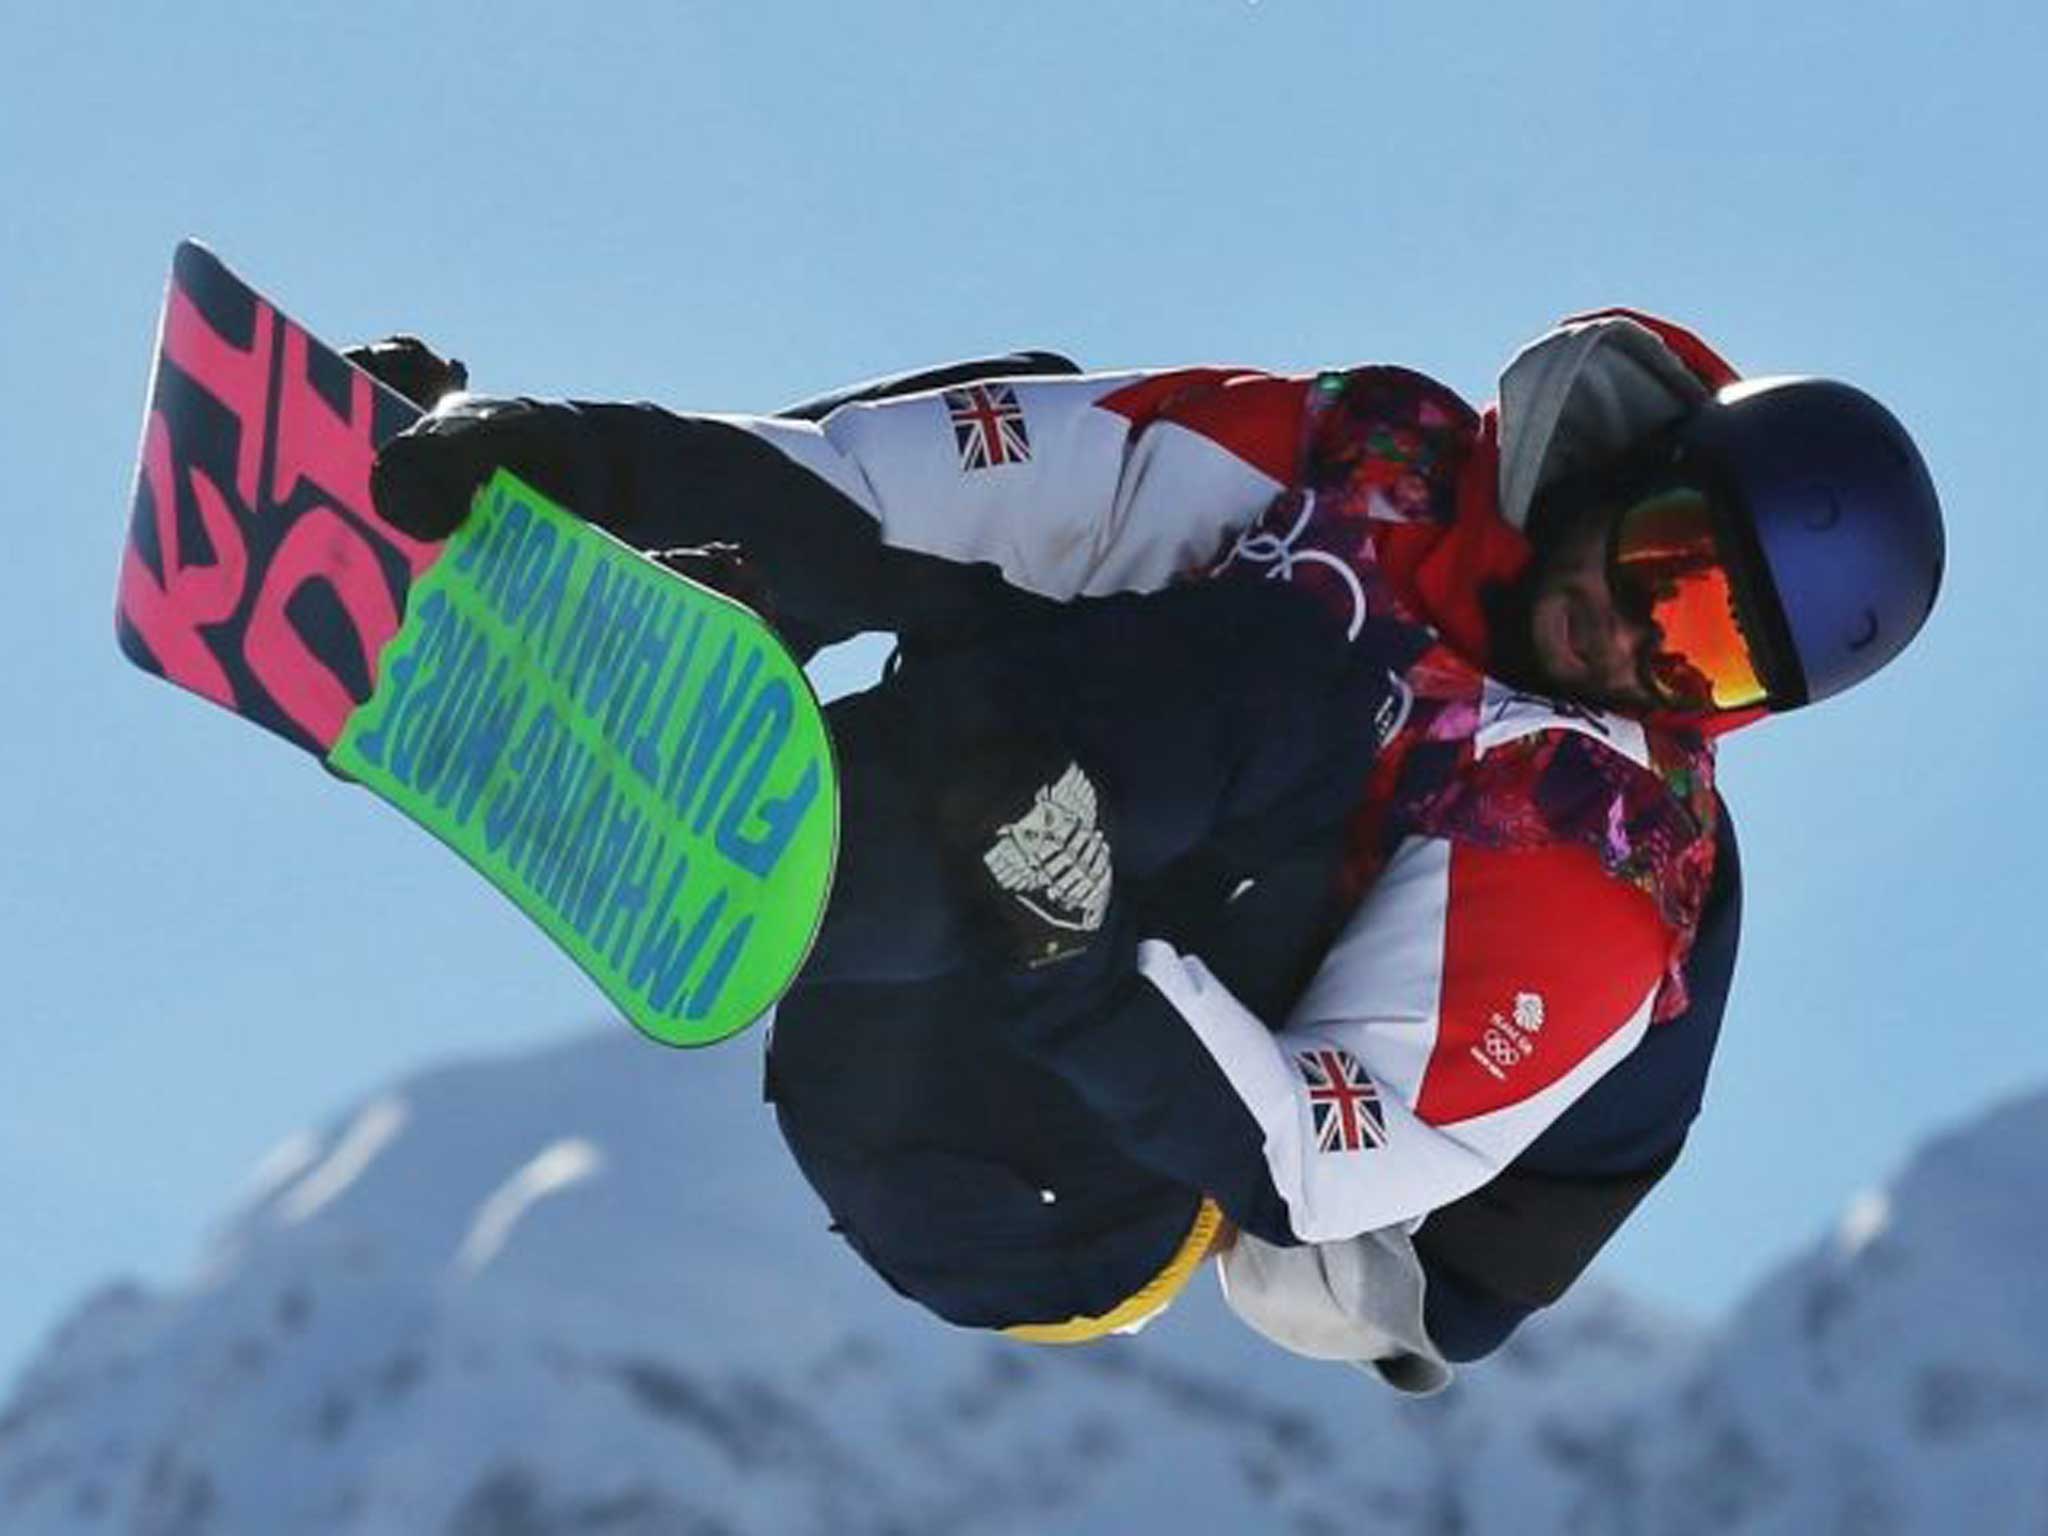 Board games: Great Britain’s Billy Morgan grabs some air in the slopestyle final, where he “hucked it”